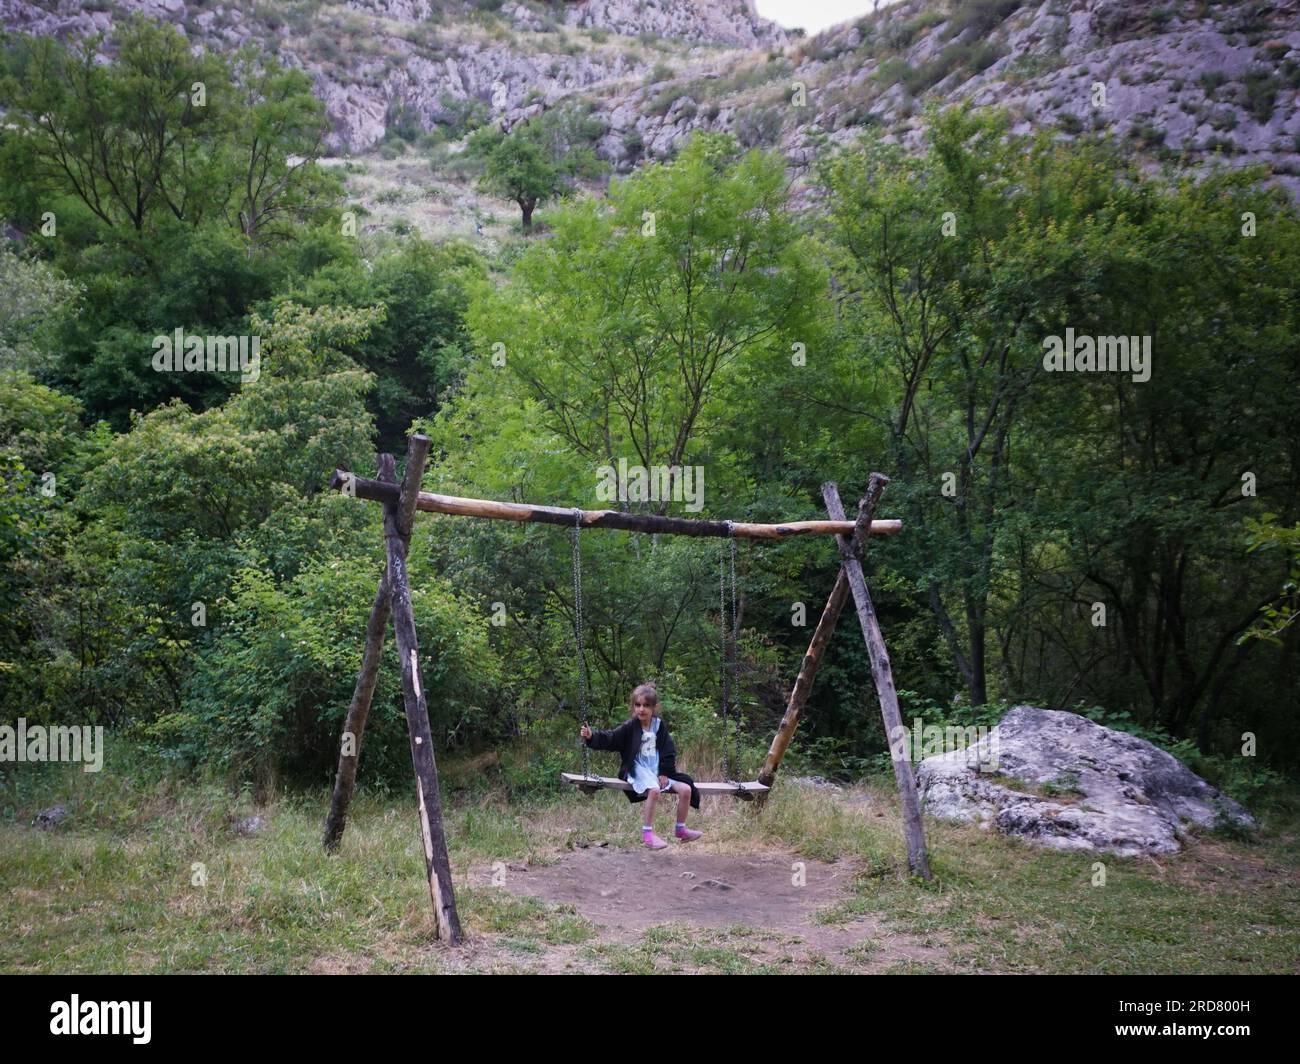 A toddler seen playing on a swing at the Honut Canyon Natural Reserve of Shusha, Nagorno-Karabakh. The unrecognised yet de facto independent country in South Caucasus, Nagorno-Karabakh (also known as Artsakh) has been in the longest-running territorial dispute between Azerbaijan and Armenia in post-Soviet Eurasia since the collapse of Soviet Union. It is mainly populated by ethnic Armenians. Stock Photo